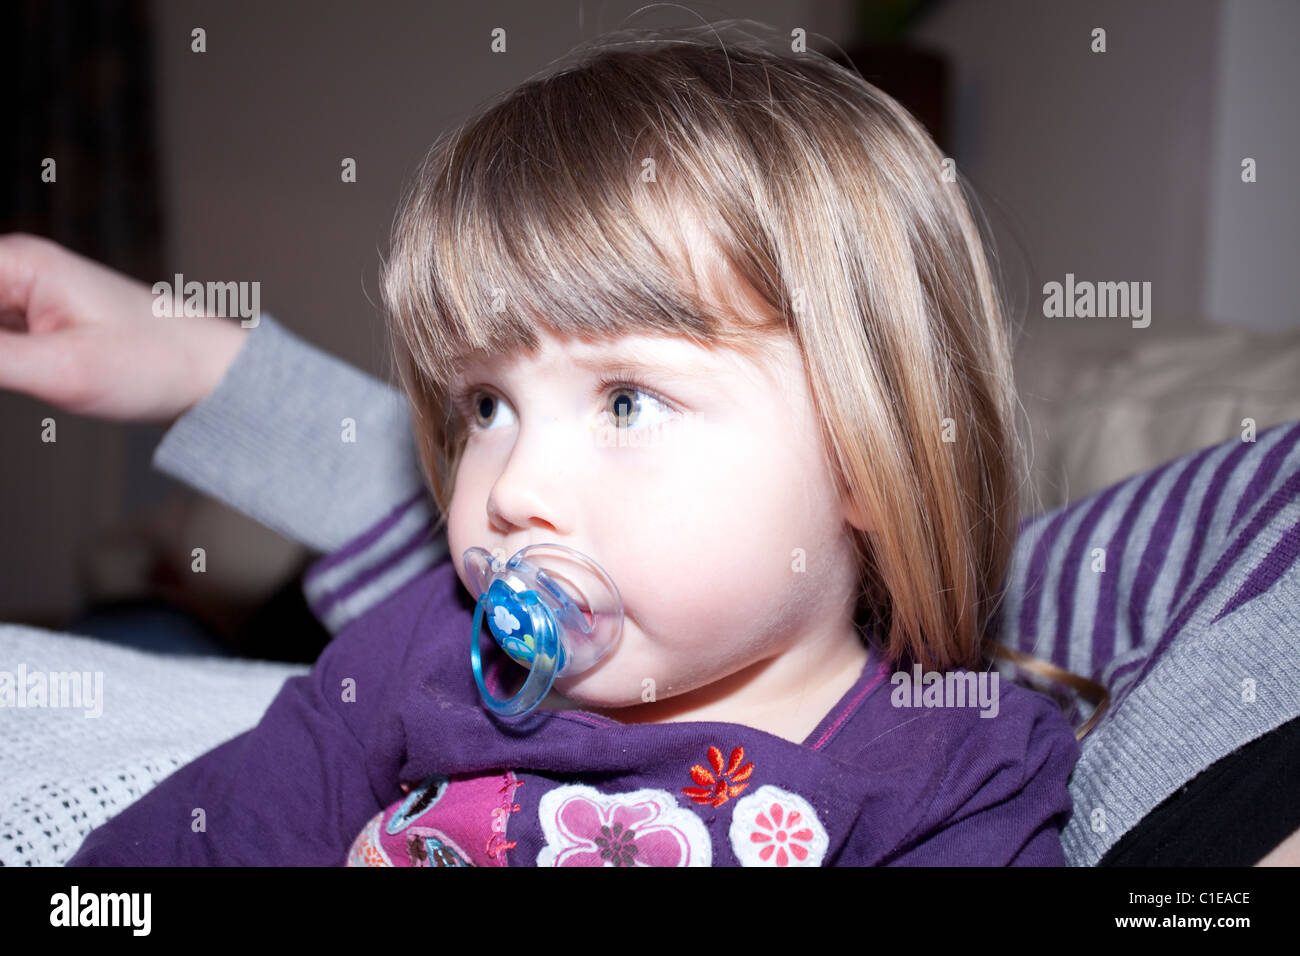 toddler with pacifier watching television Stock Photo